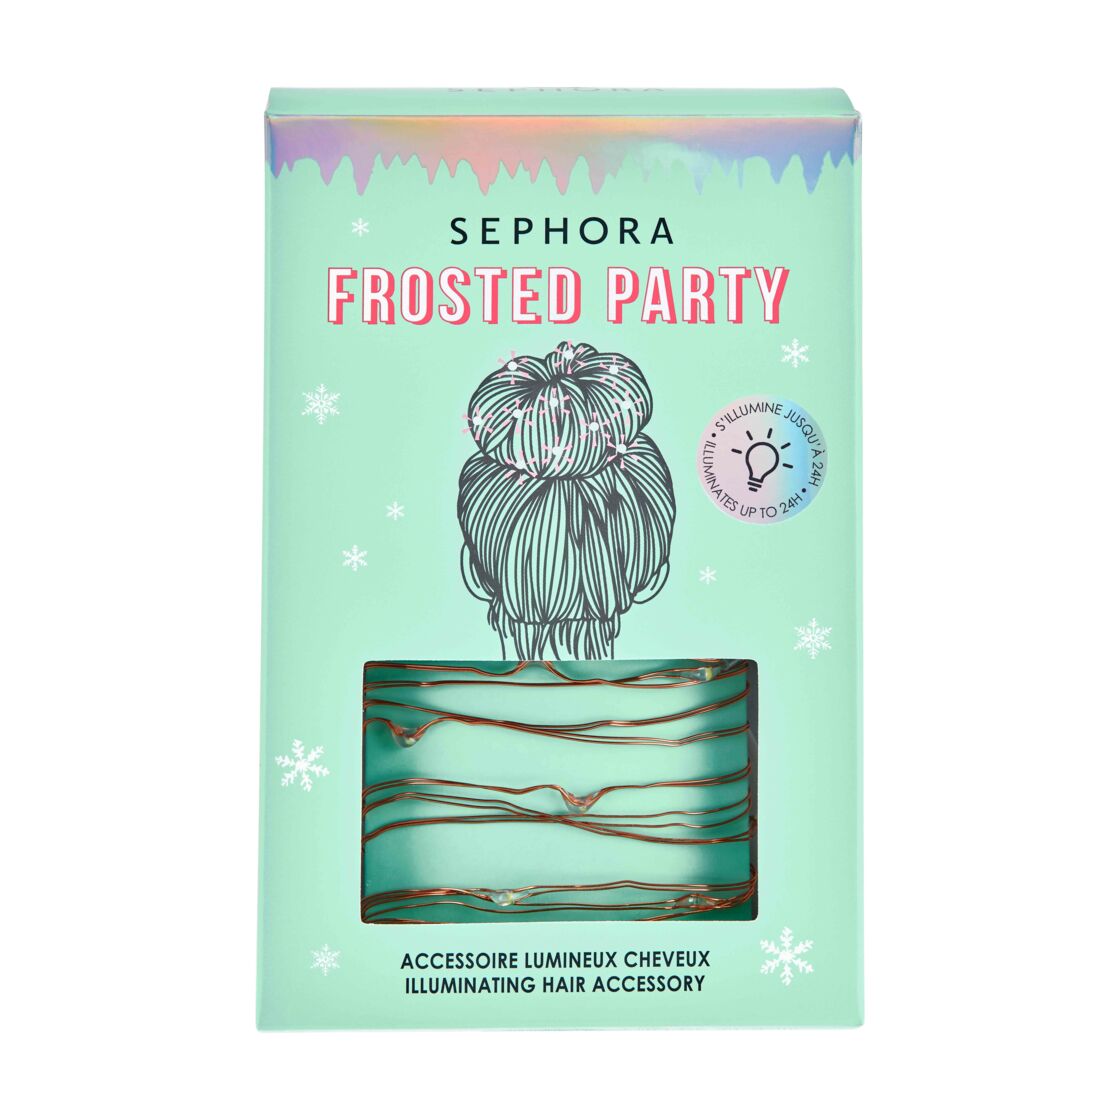 Ornements. Frosted Party accessoire lumineux, 5,99 €, Sephora.